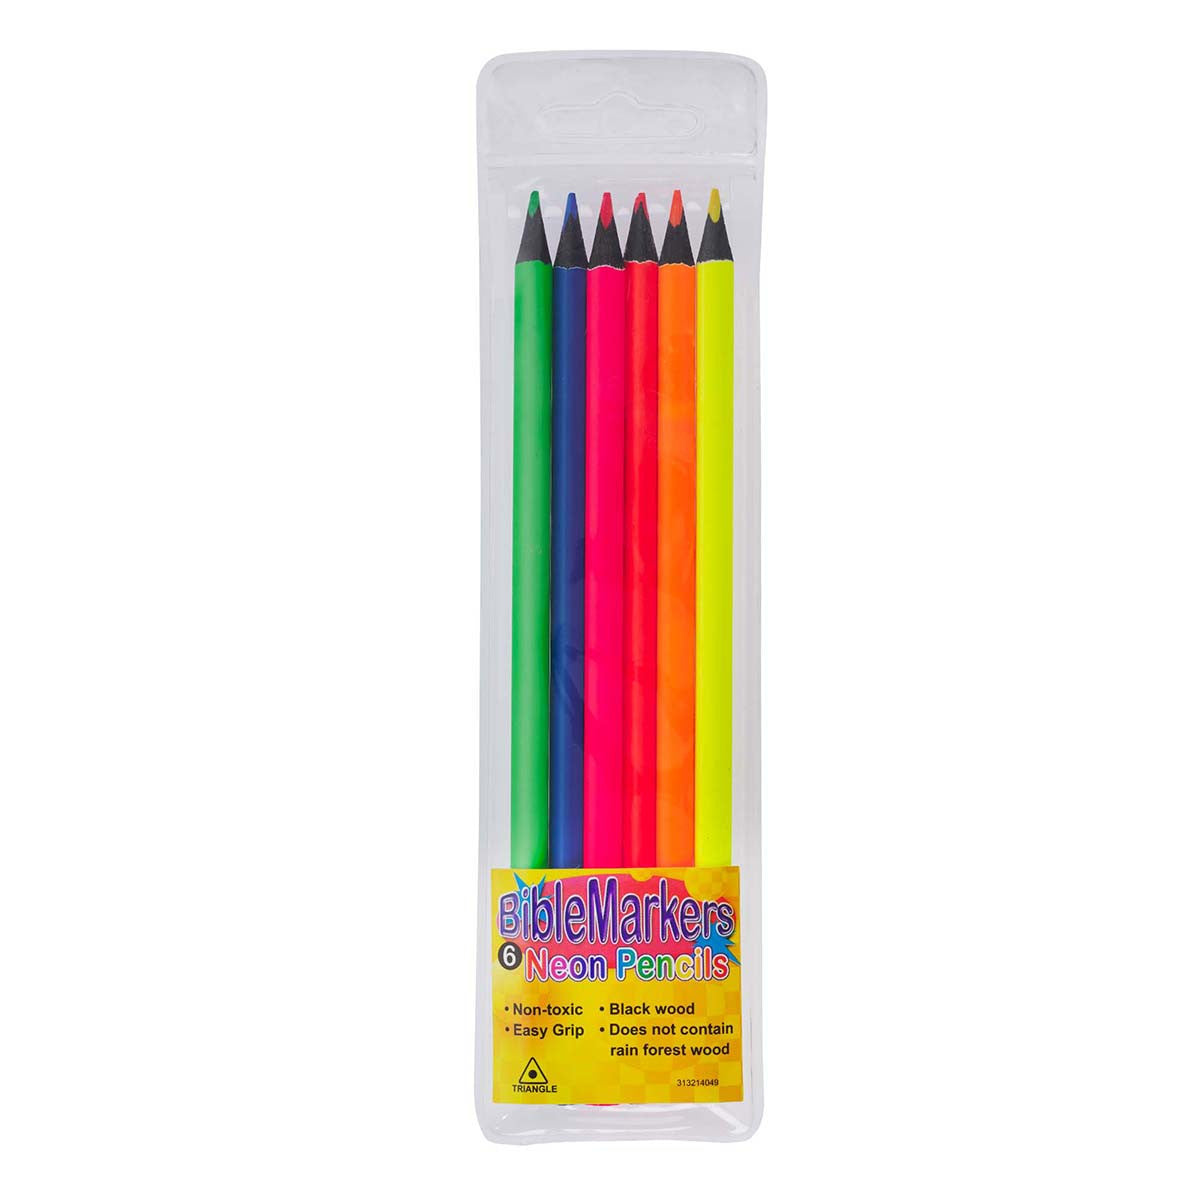 https://cdn.shopify.com/s/files/1/0529/0970/3356/products/BibleMarkers-NeonPencils.jpg?v=1611612445